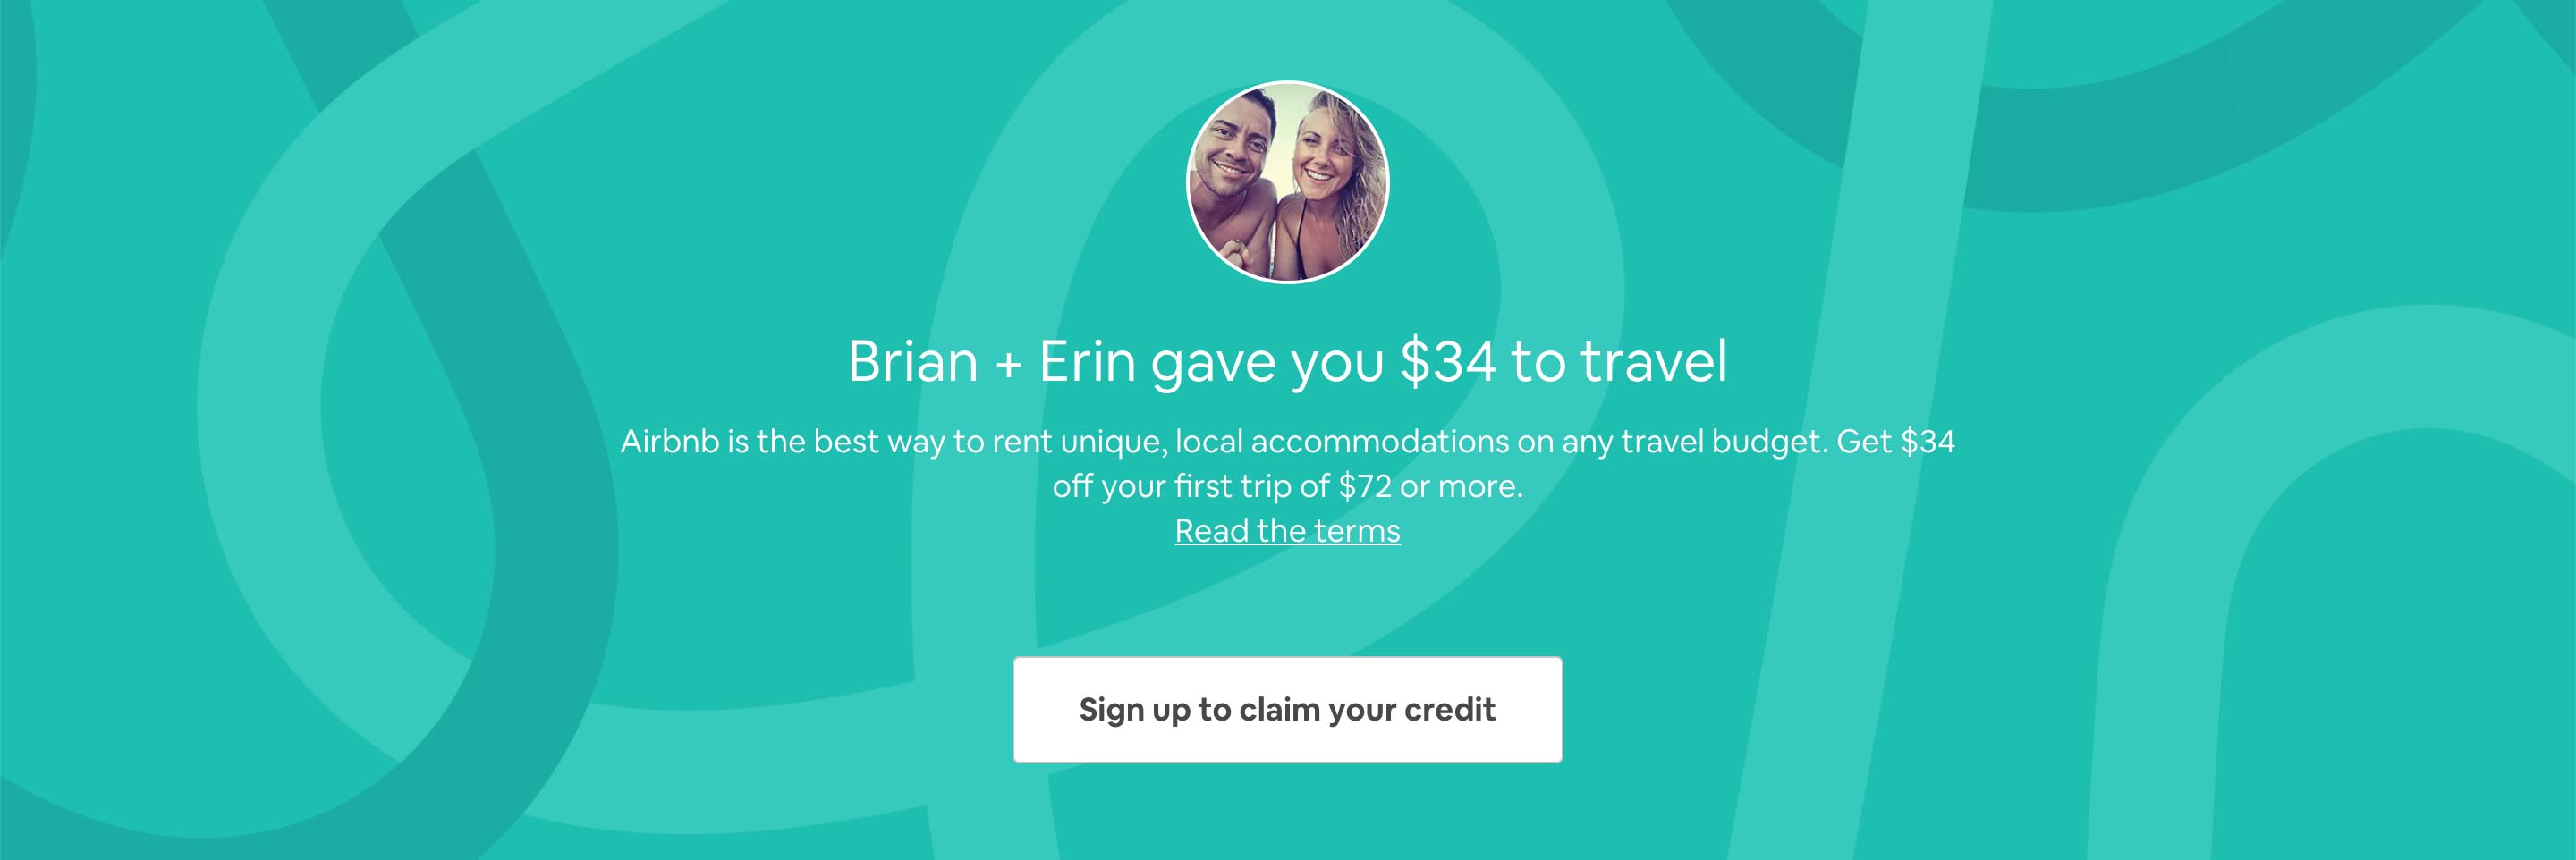 BE Adventure Partners Invites You To Use Airbnb